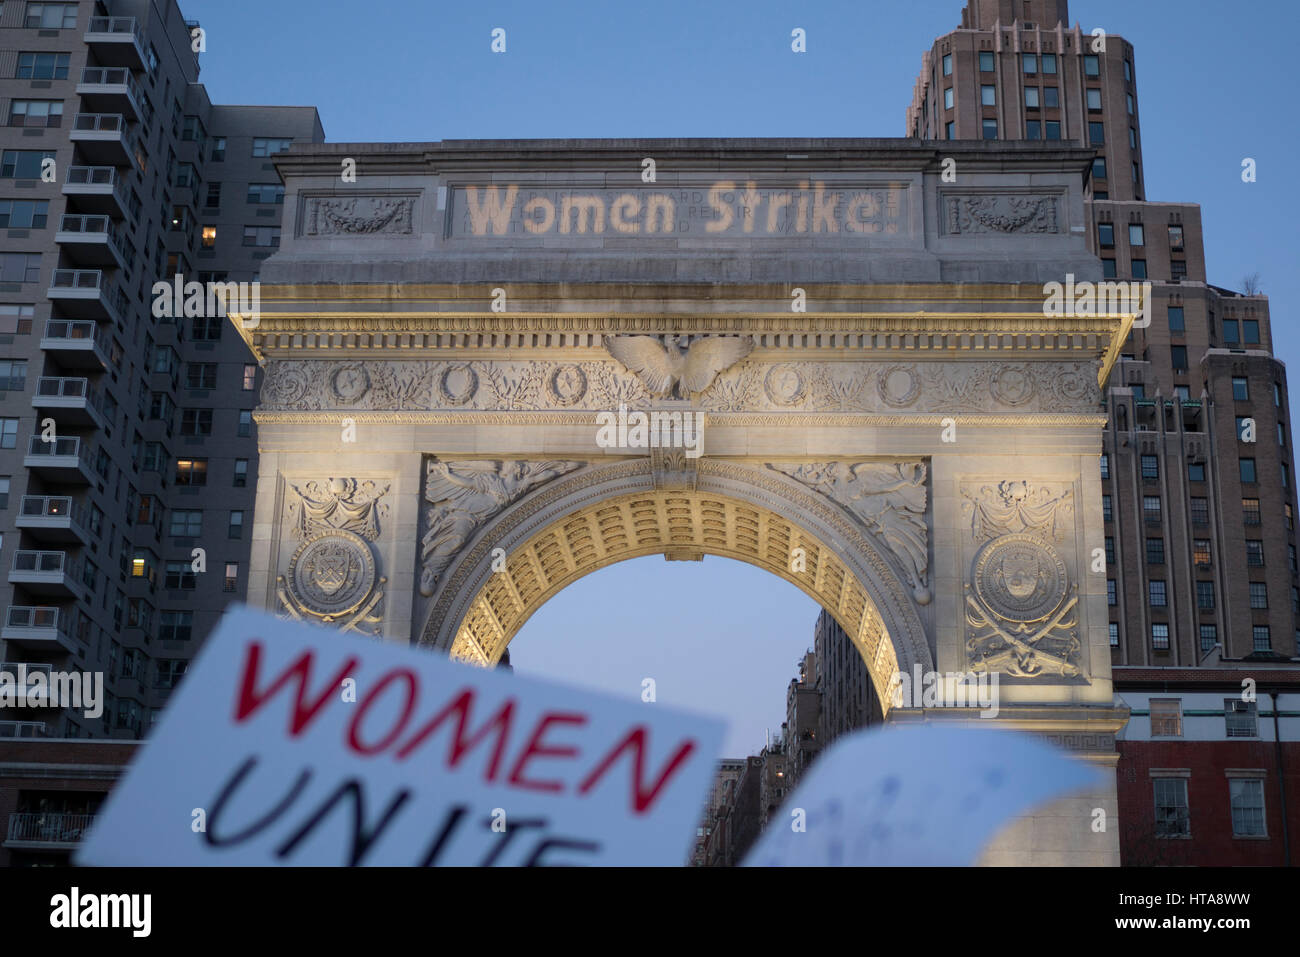 New York City, USA. 8th March 2017. “Women Strike!” being projected onto the Washing Square Arch during the International Working Women’s Day Strike rally in NYC. Credit: Sinisa Kukic/Alamy Live News Stock Photo